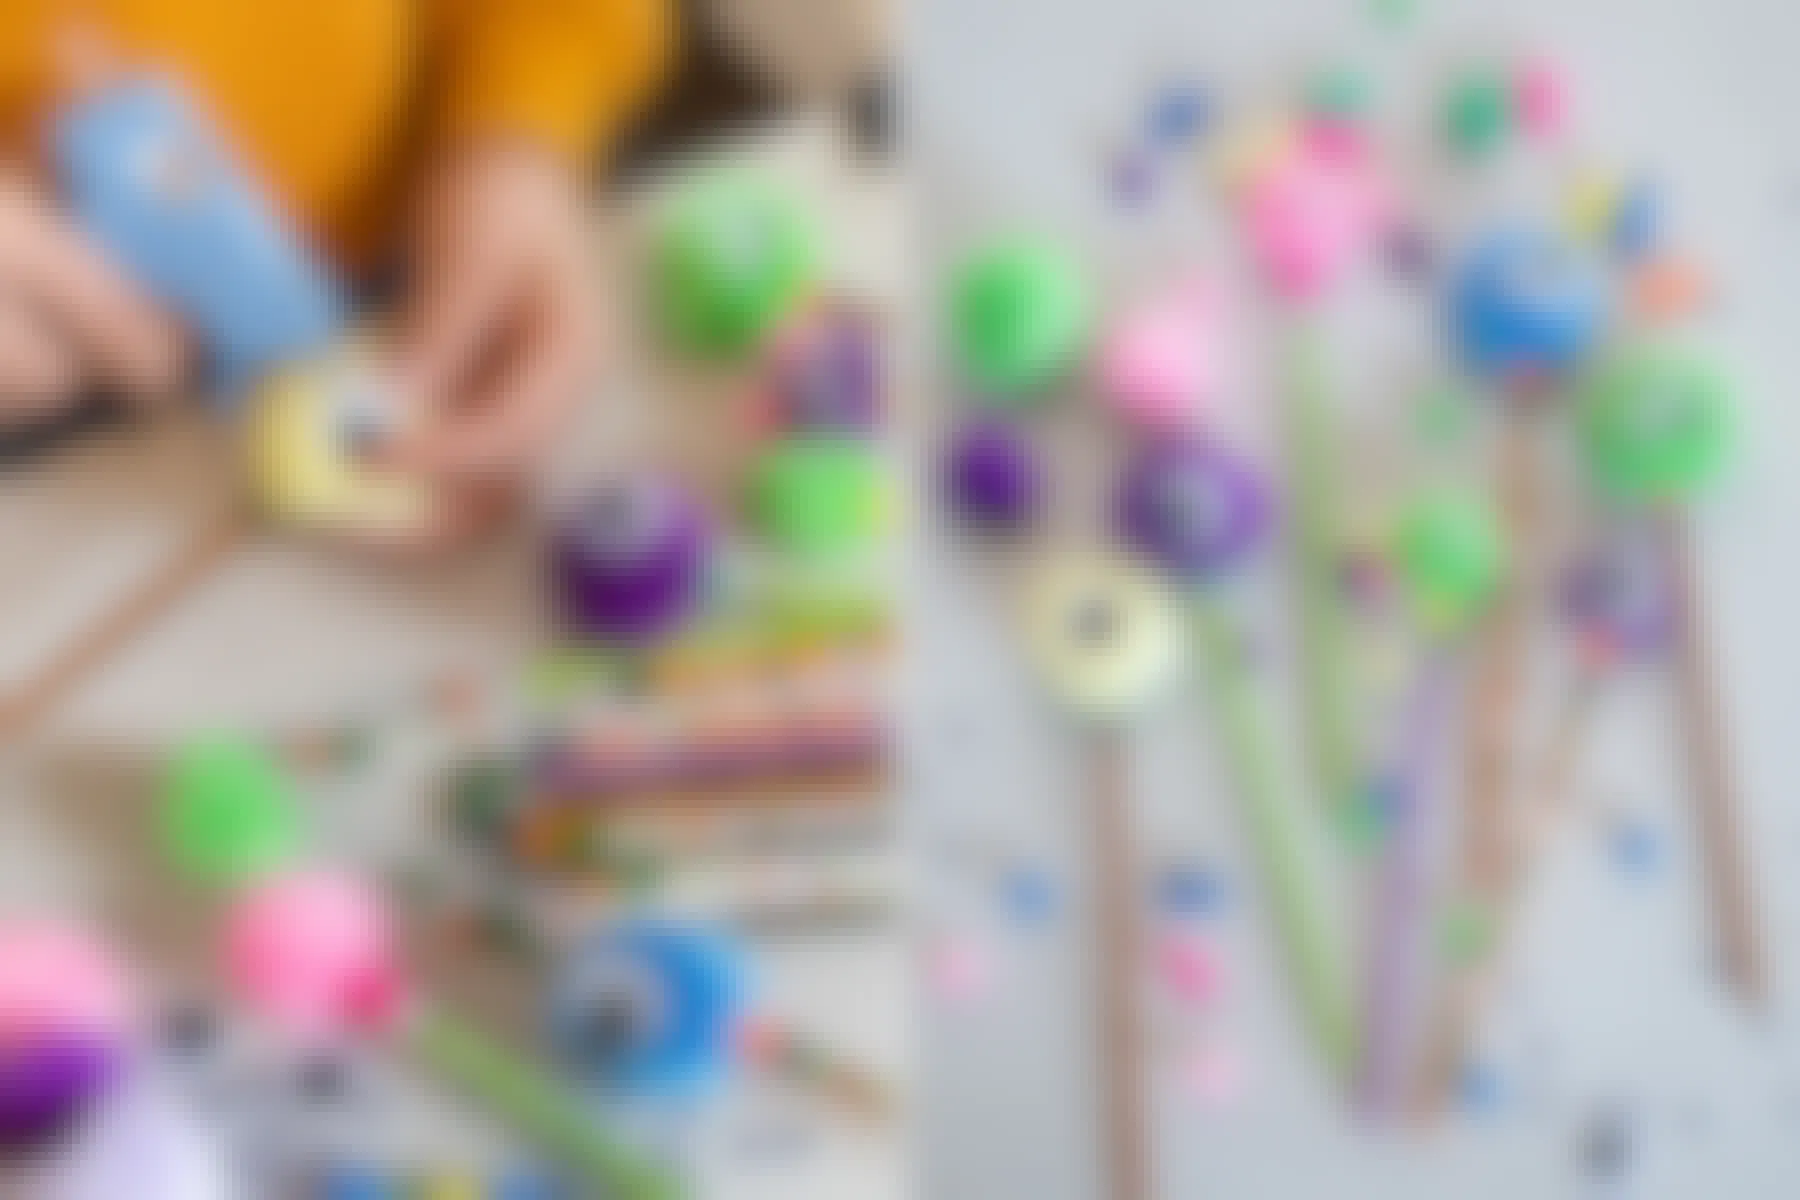 A person making little monsters by hot gluing pom pom balls and goggly eyes onto Halloween pencils.